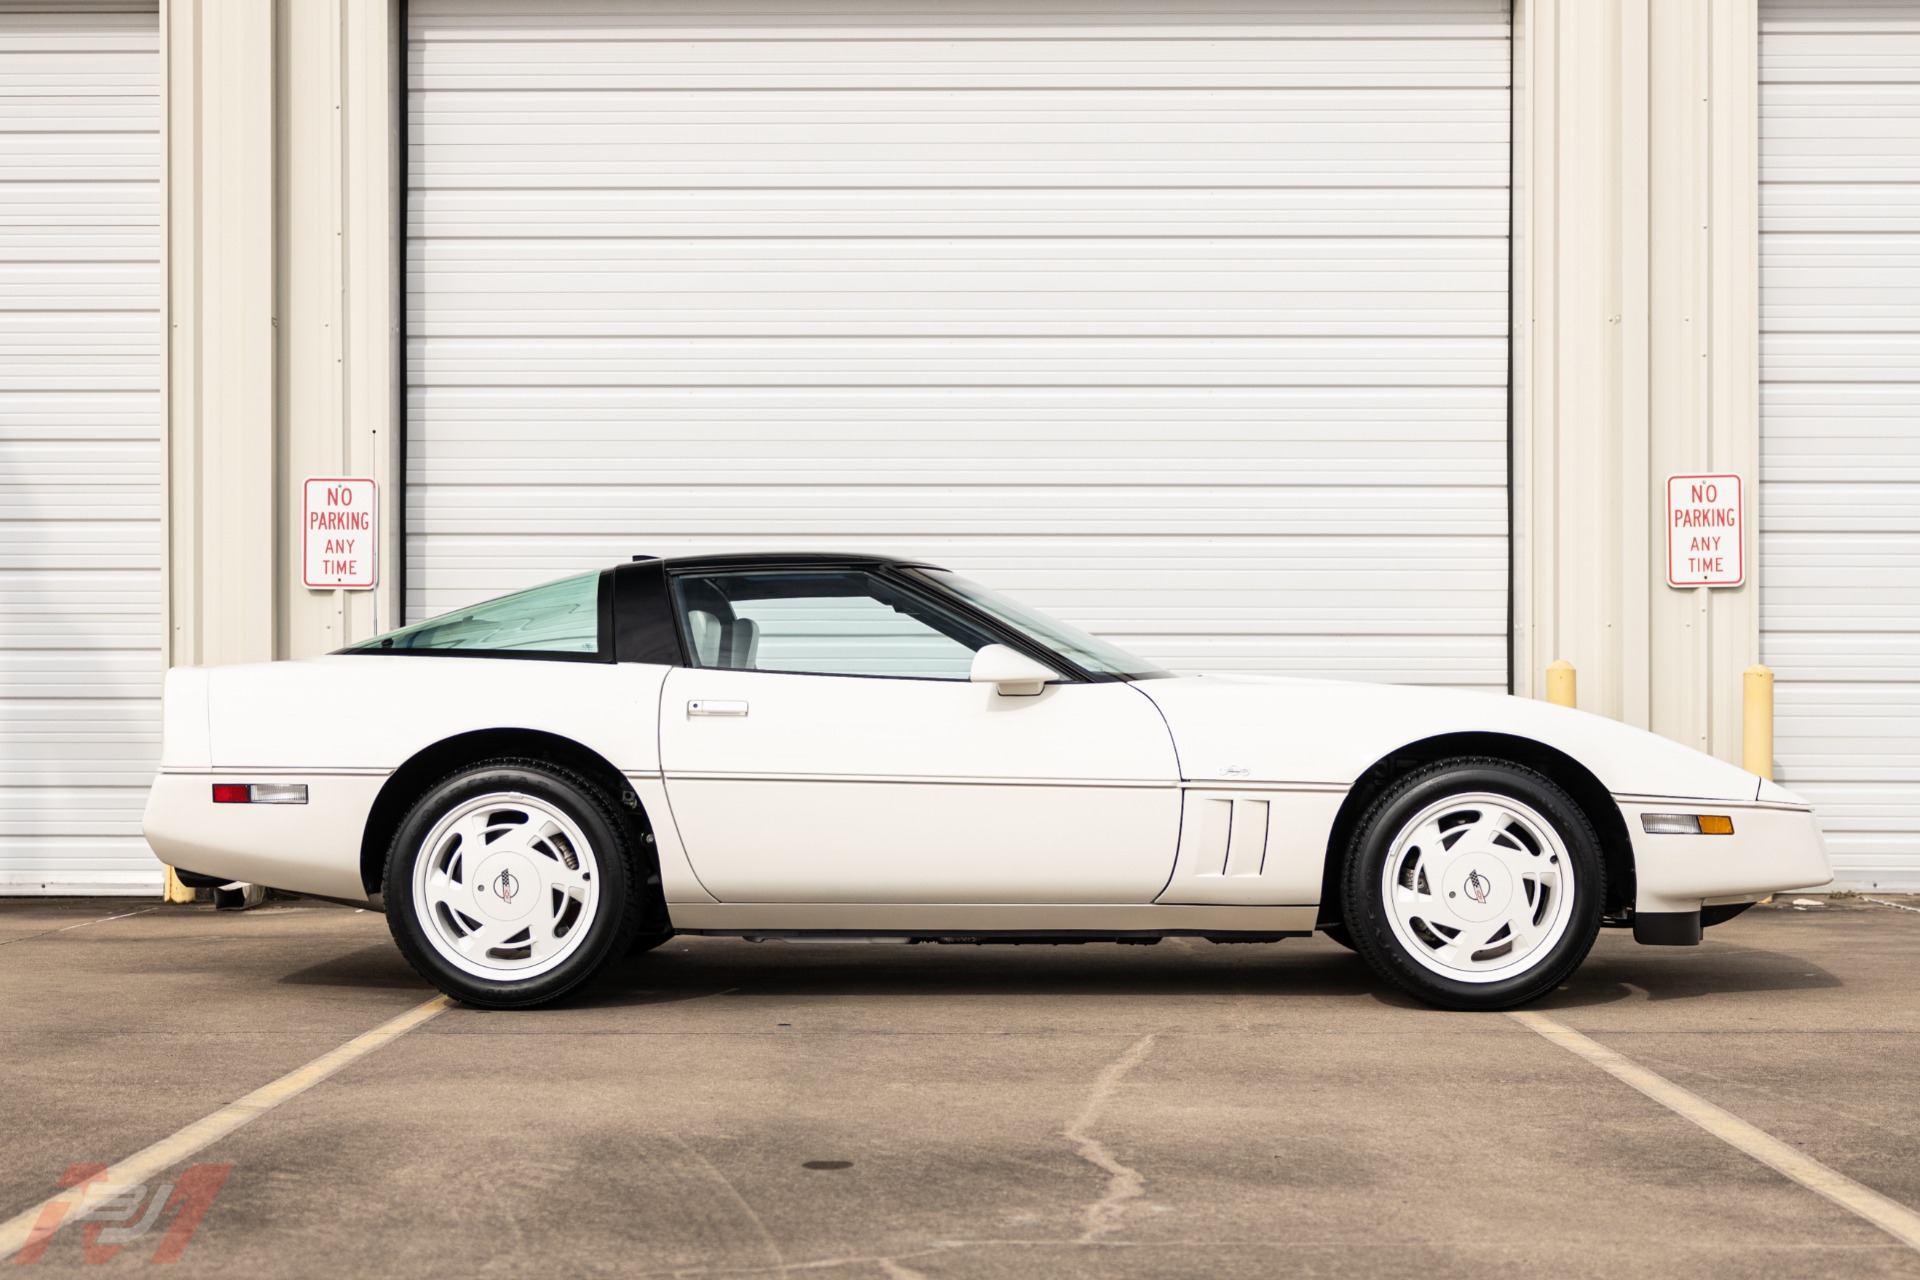 Used-1988-Chevrolet-Corvette-35th-Anniversary-with-491-miles